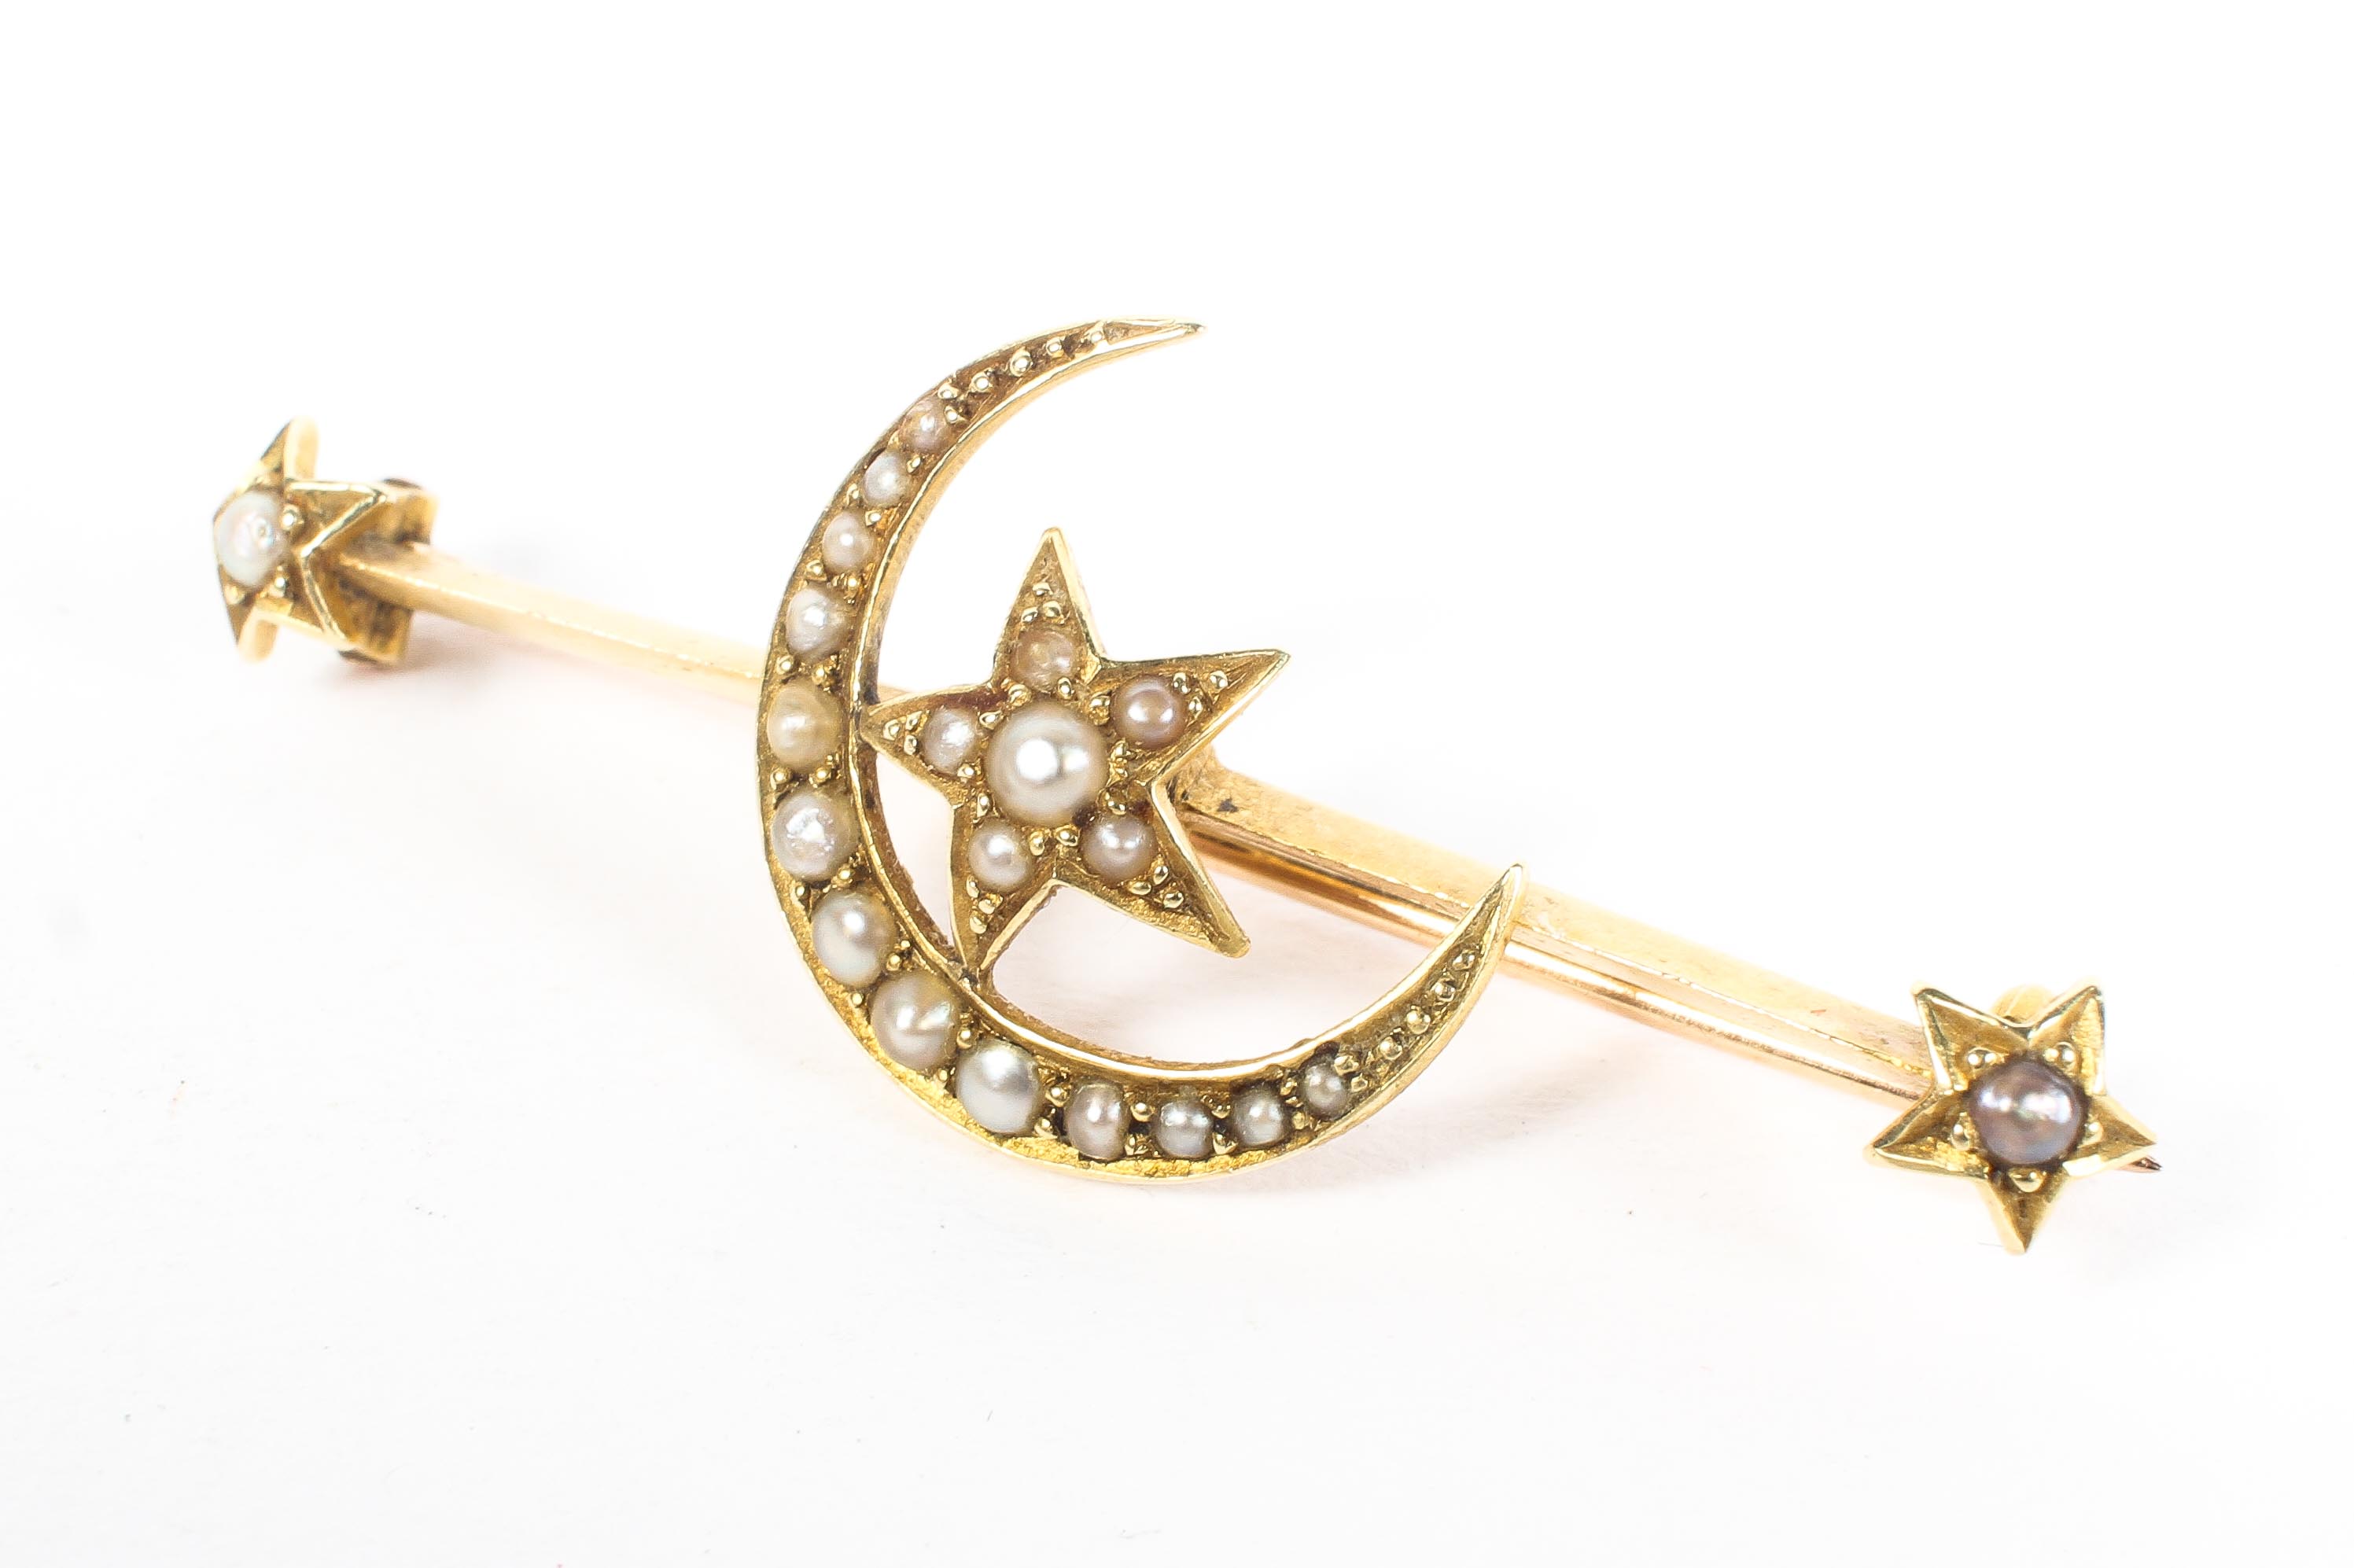 A 15ct yellow gold crescent moon and stars brooch, set with split pearl accents, 3.